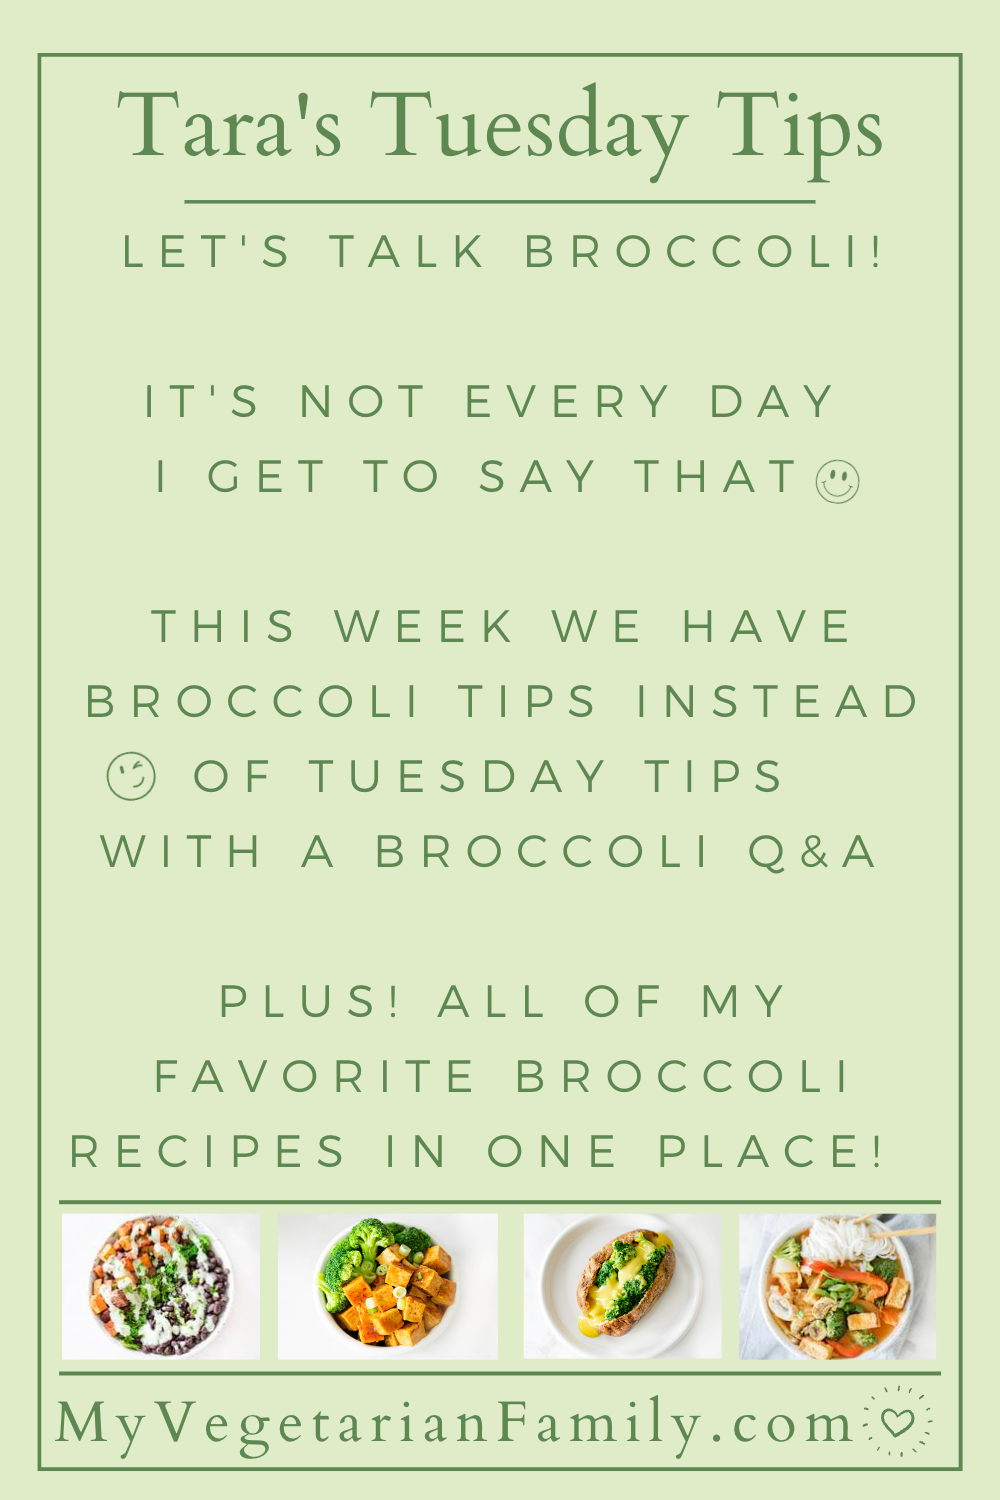 Everything You Need to Know About Broccoli | Tara's Tuesday Tips | My Vegetarian Family #broccolifacts #tarastuesdaytips